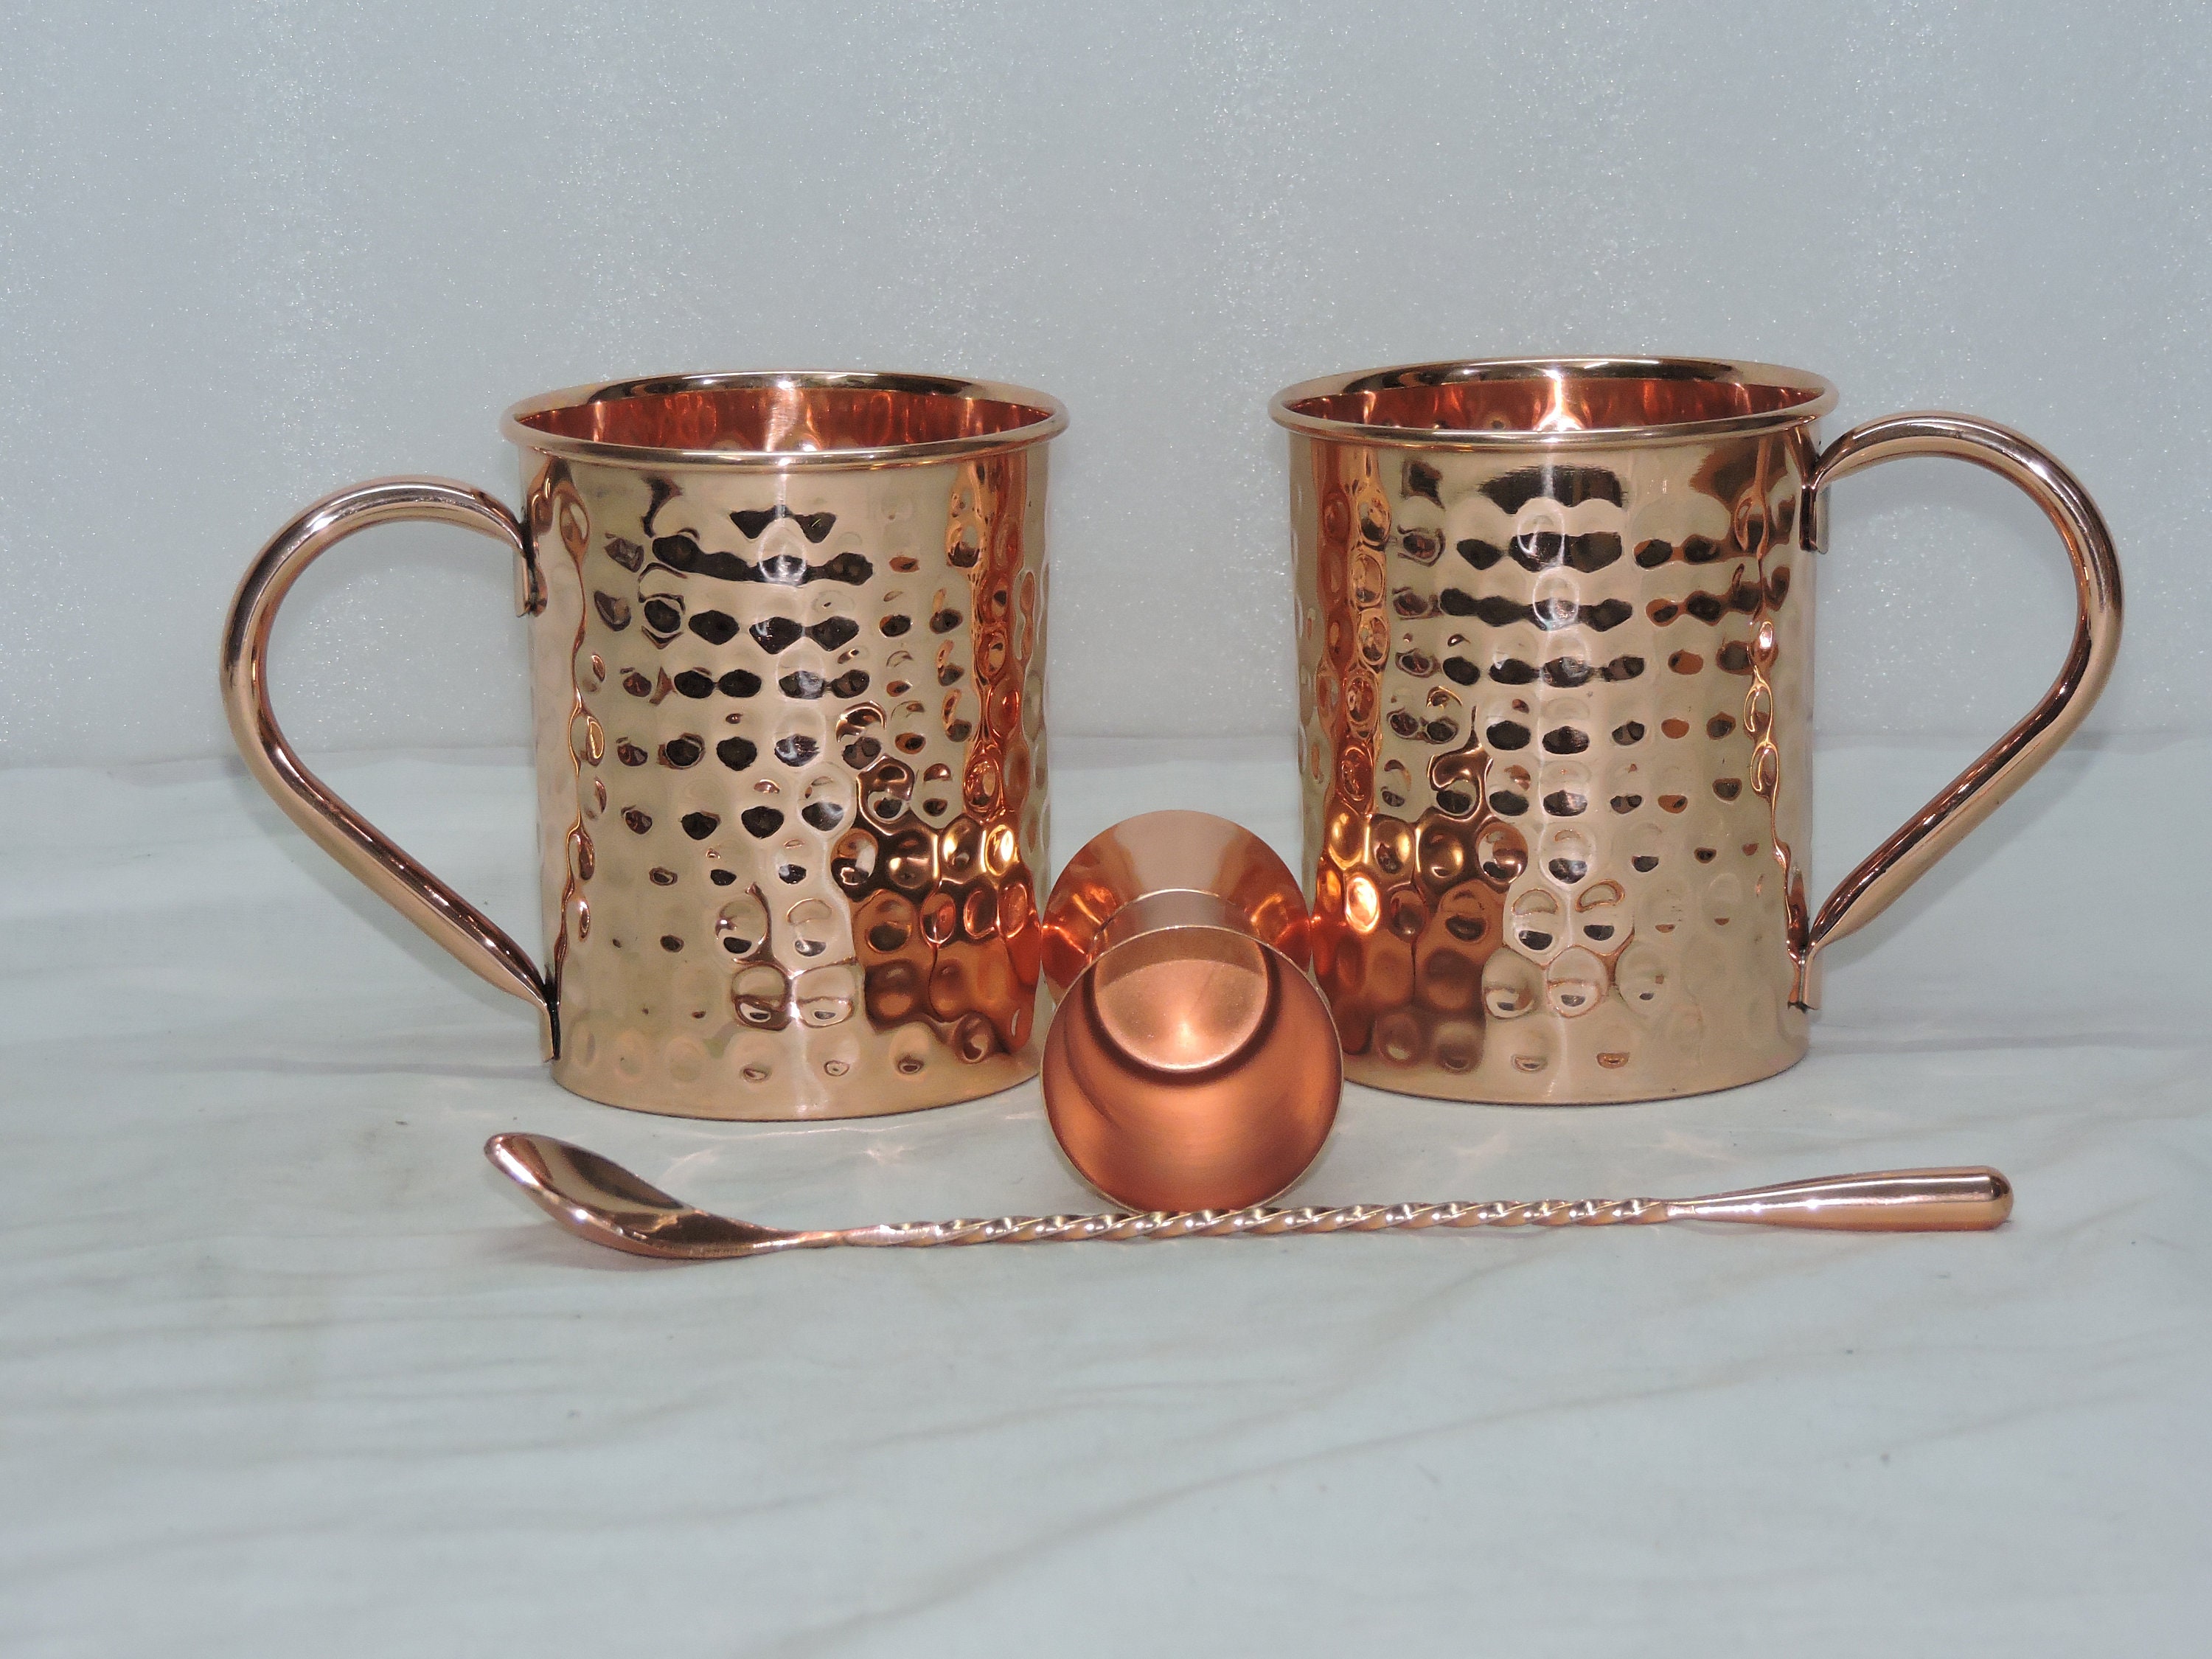 Indian Handmade Stainless Steel Moscow Mule Beer Mug with Brass Handle ...